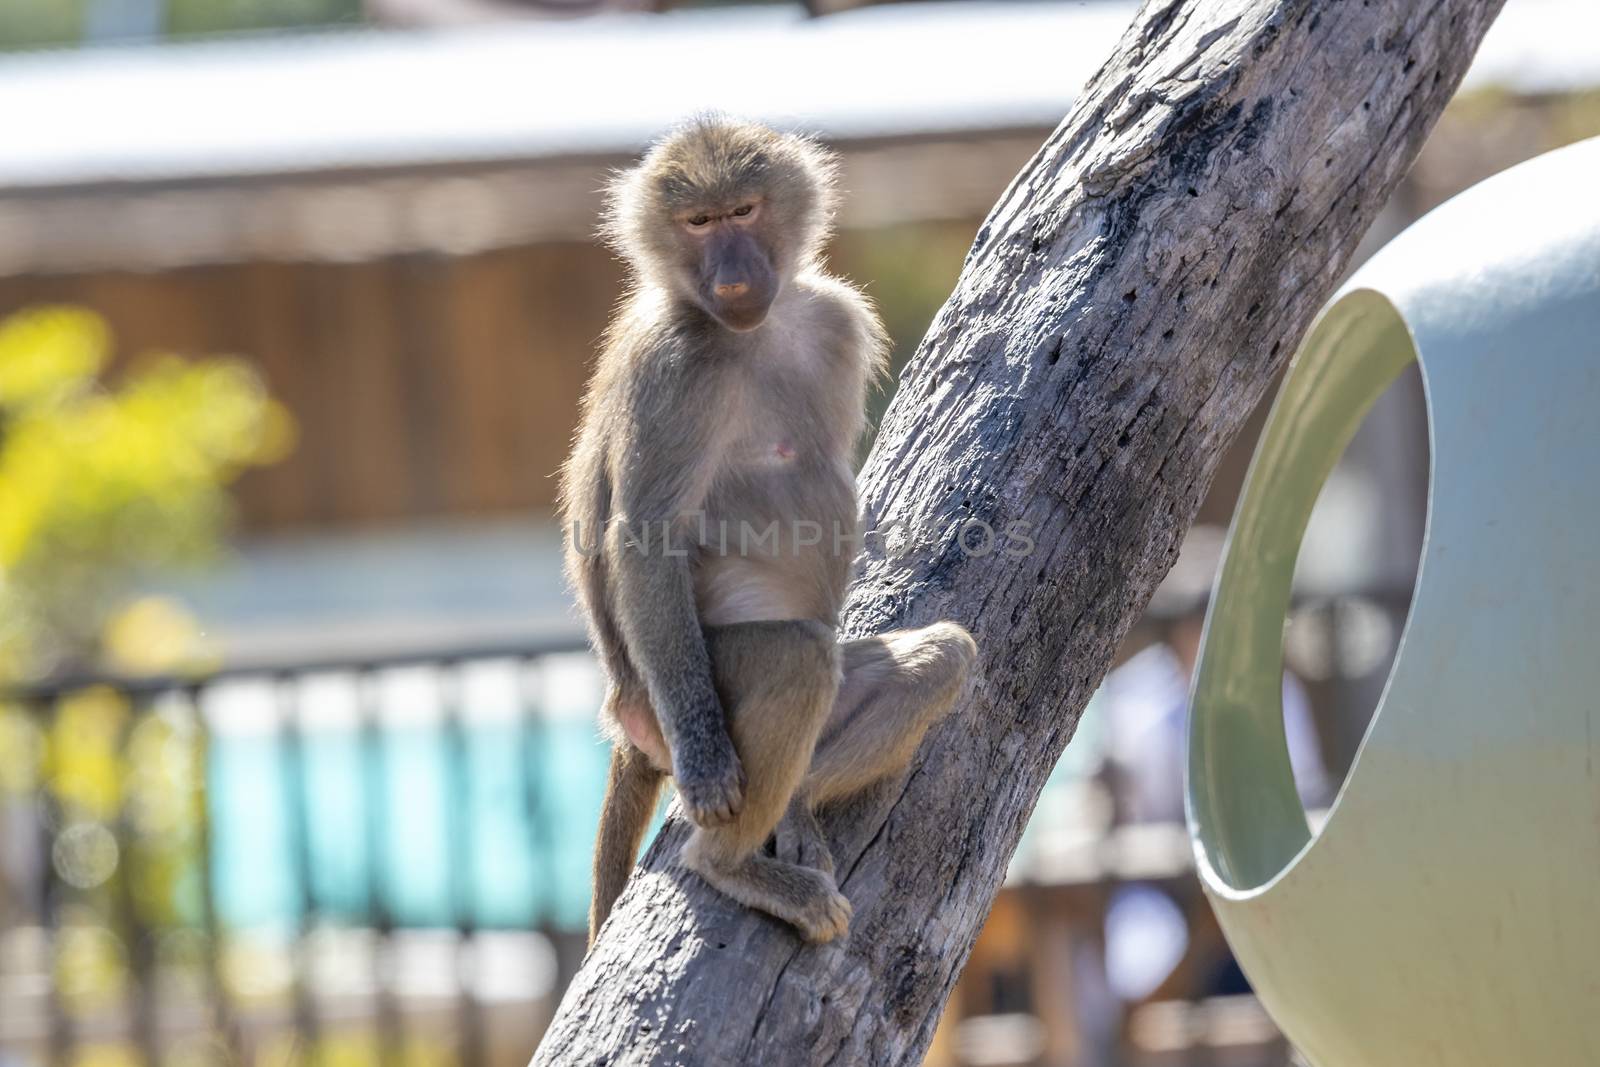 An adolescent Hamadryas Baboon relaxing in the sunshine by WittkePhotos